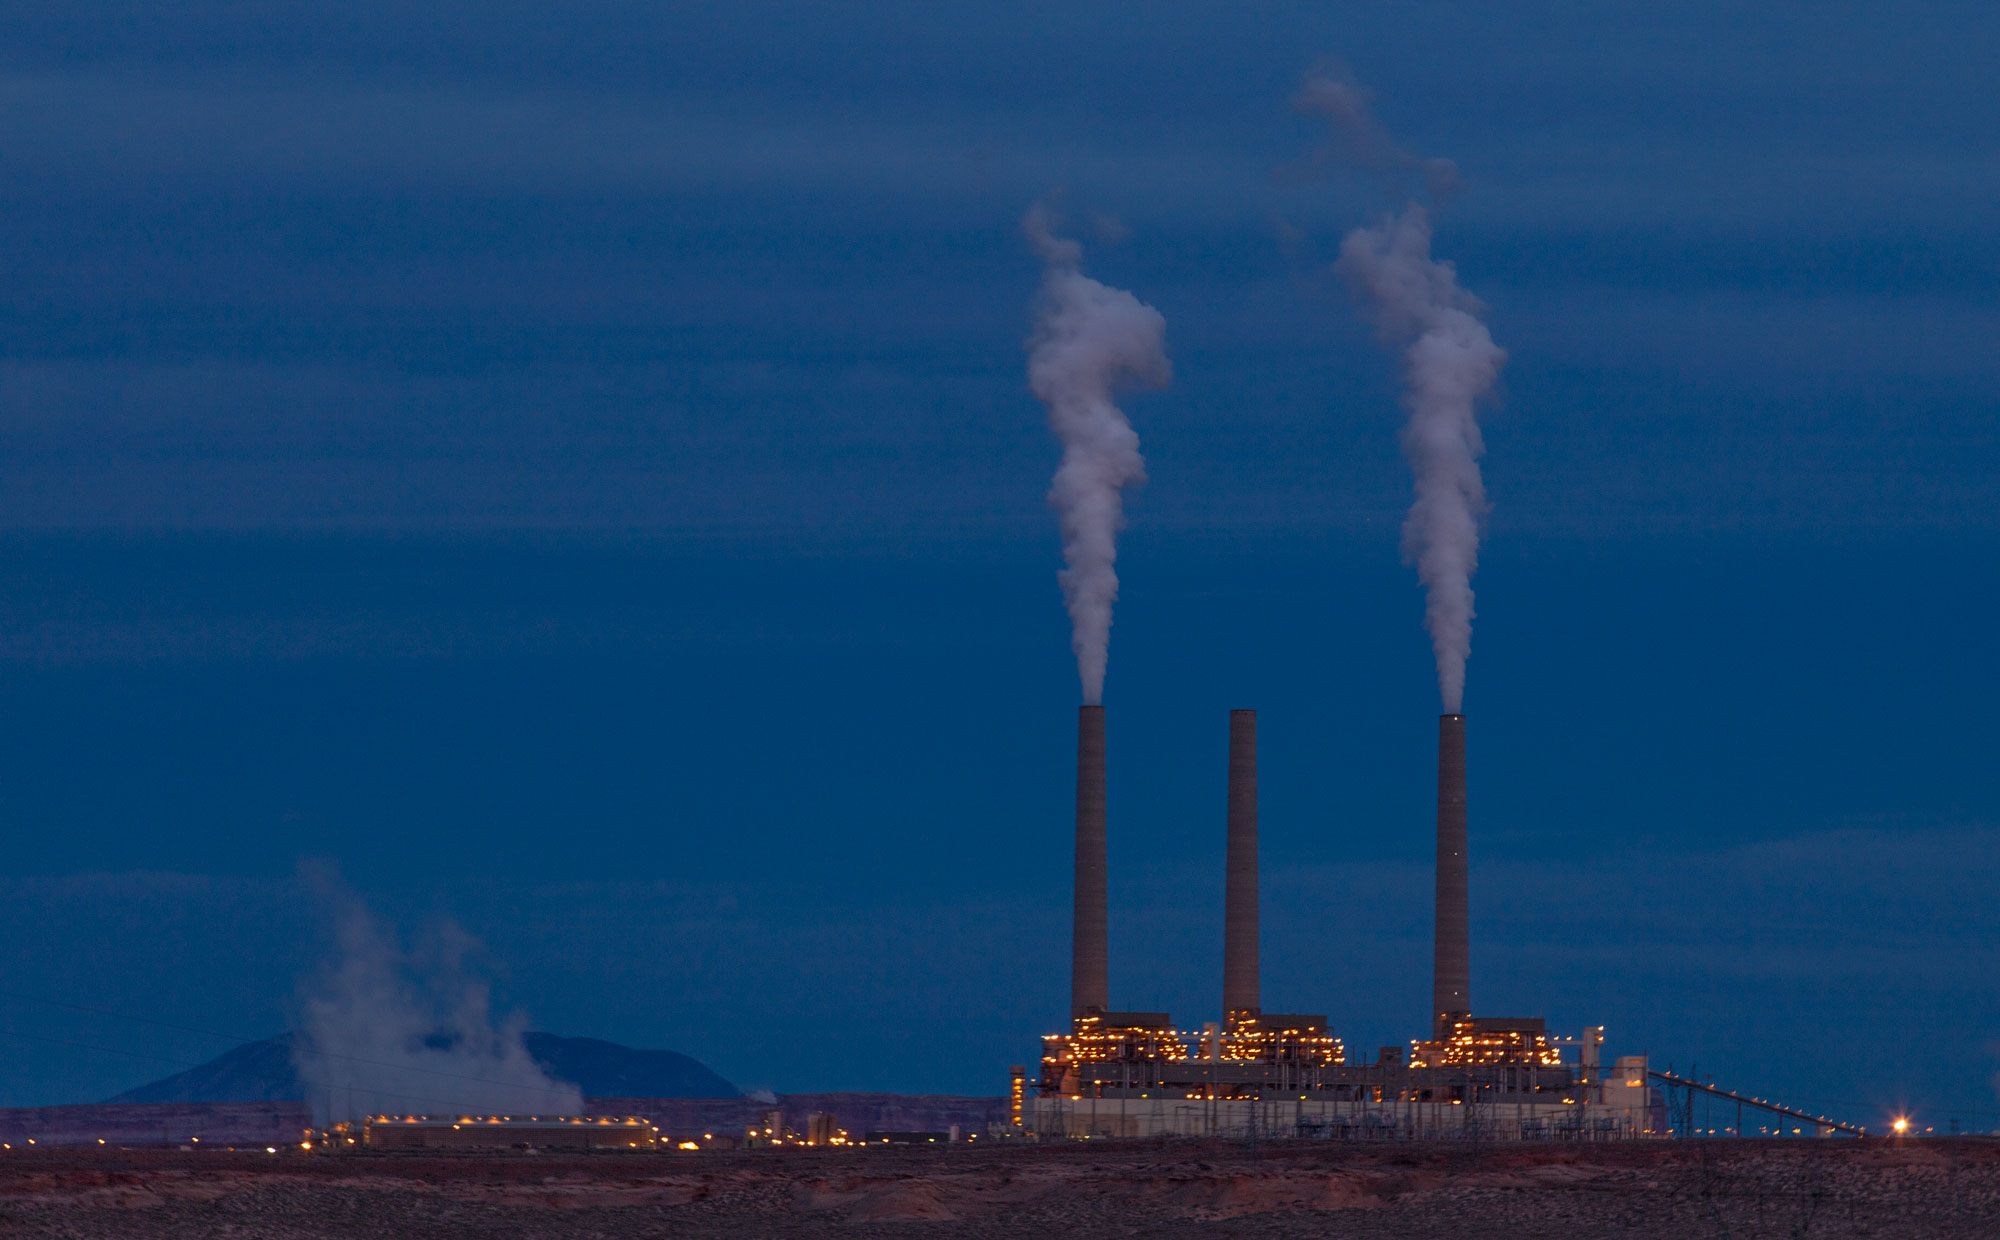 Photograph of a coal-fired powerplant probably taken at dawn or dusk (the sky is relatively dark). The plant has three smokestacks, two of which are emitting smoke. The buildings at the base of the plant have lights illuminated.